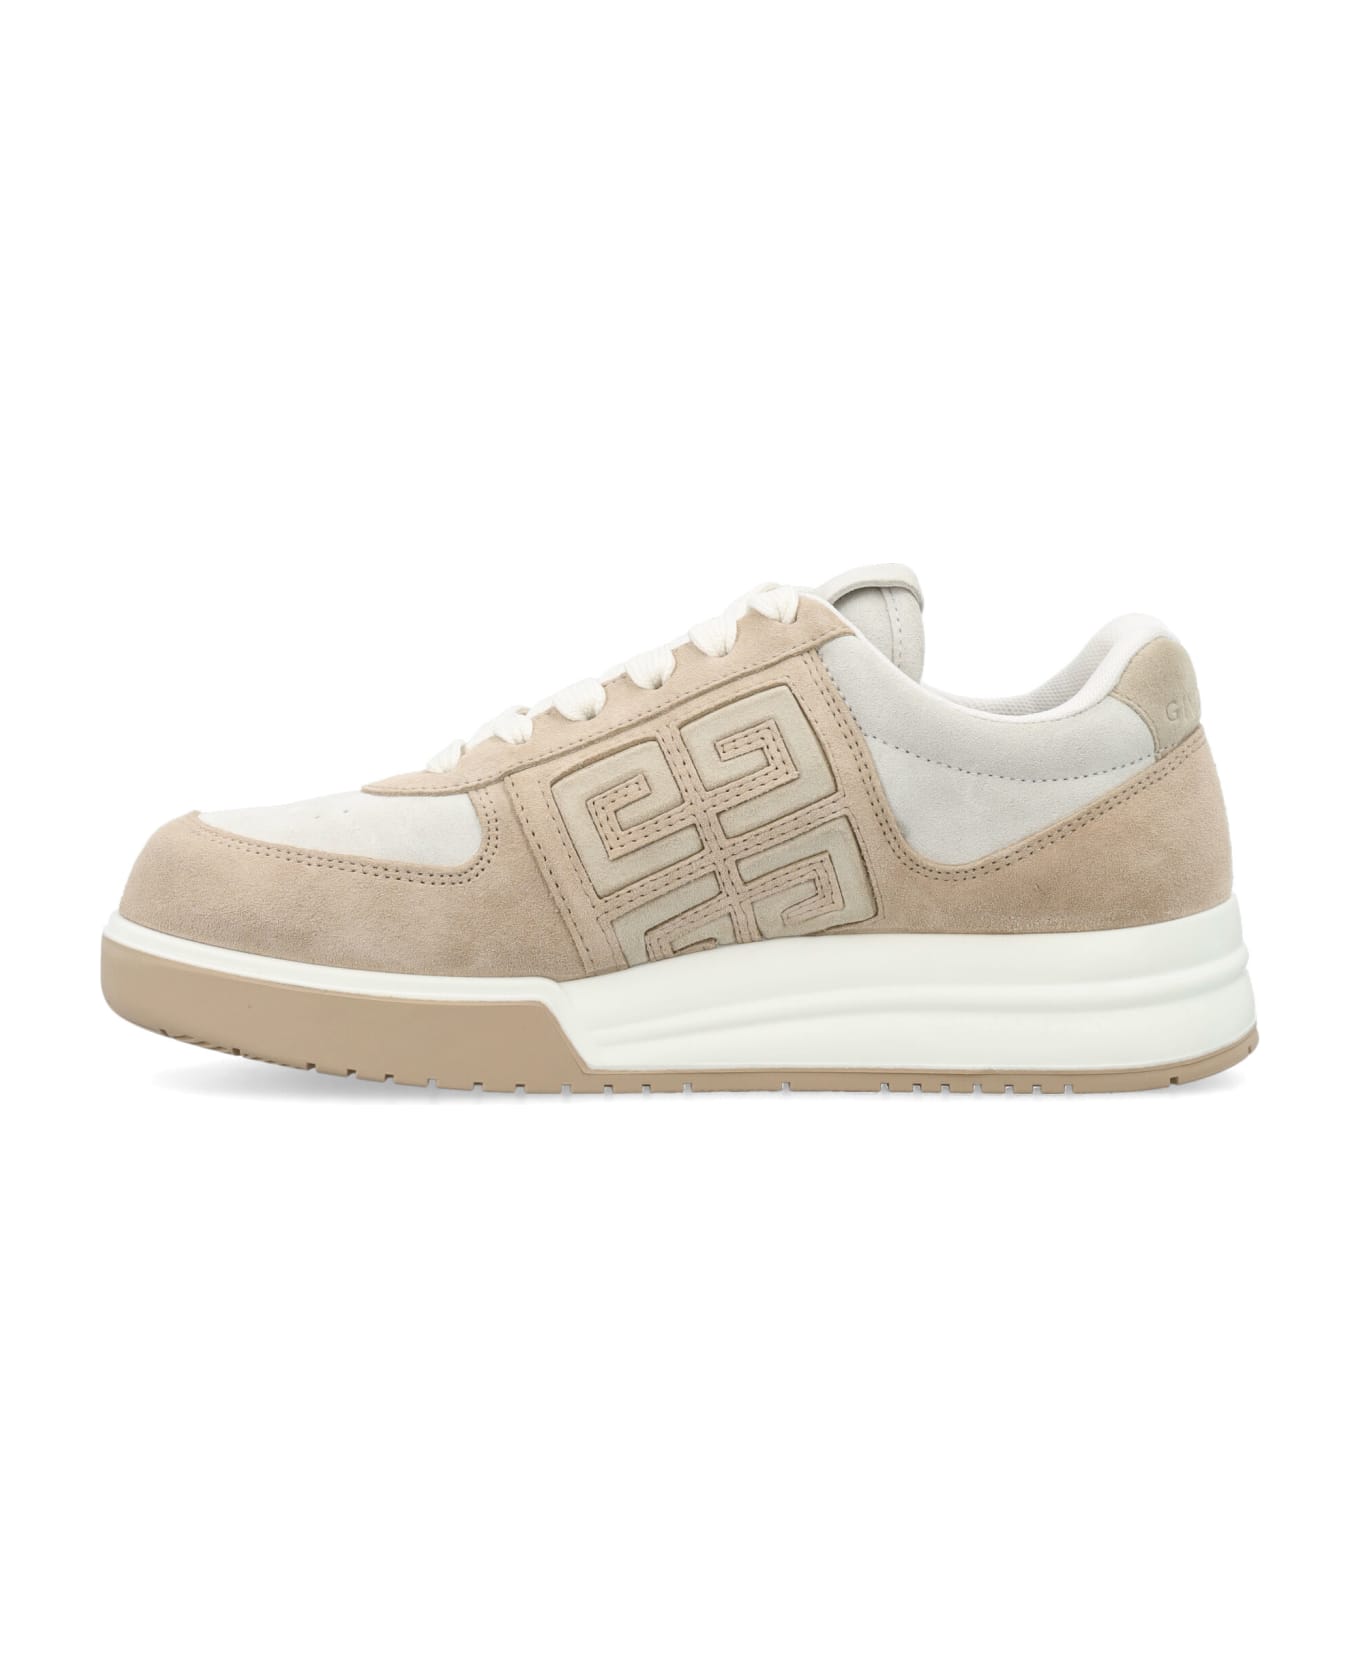 Givenchy G4 Low-top Sneakers - BEIGE/WHITE